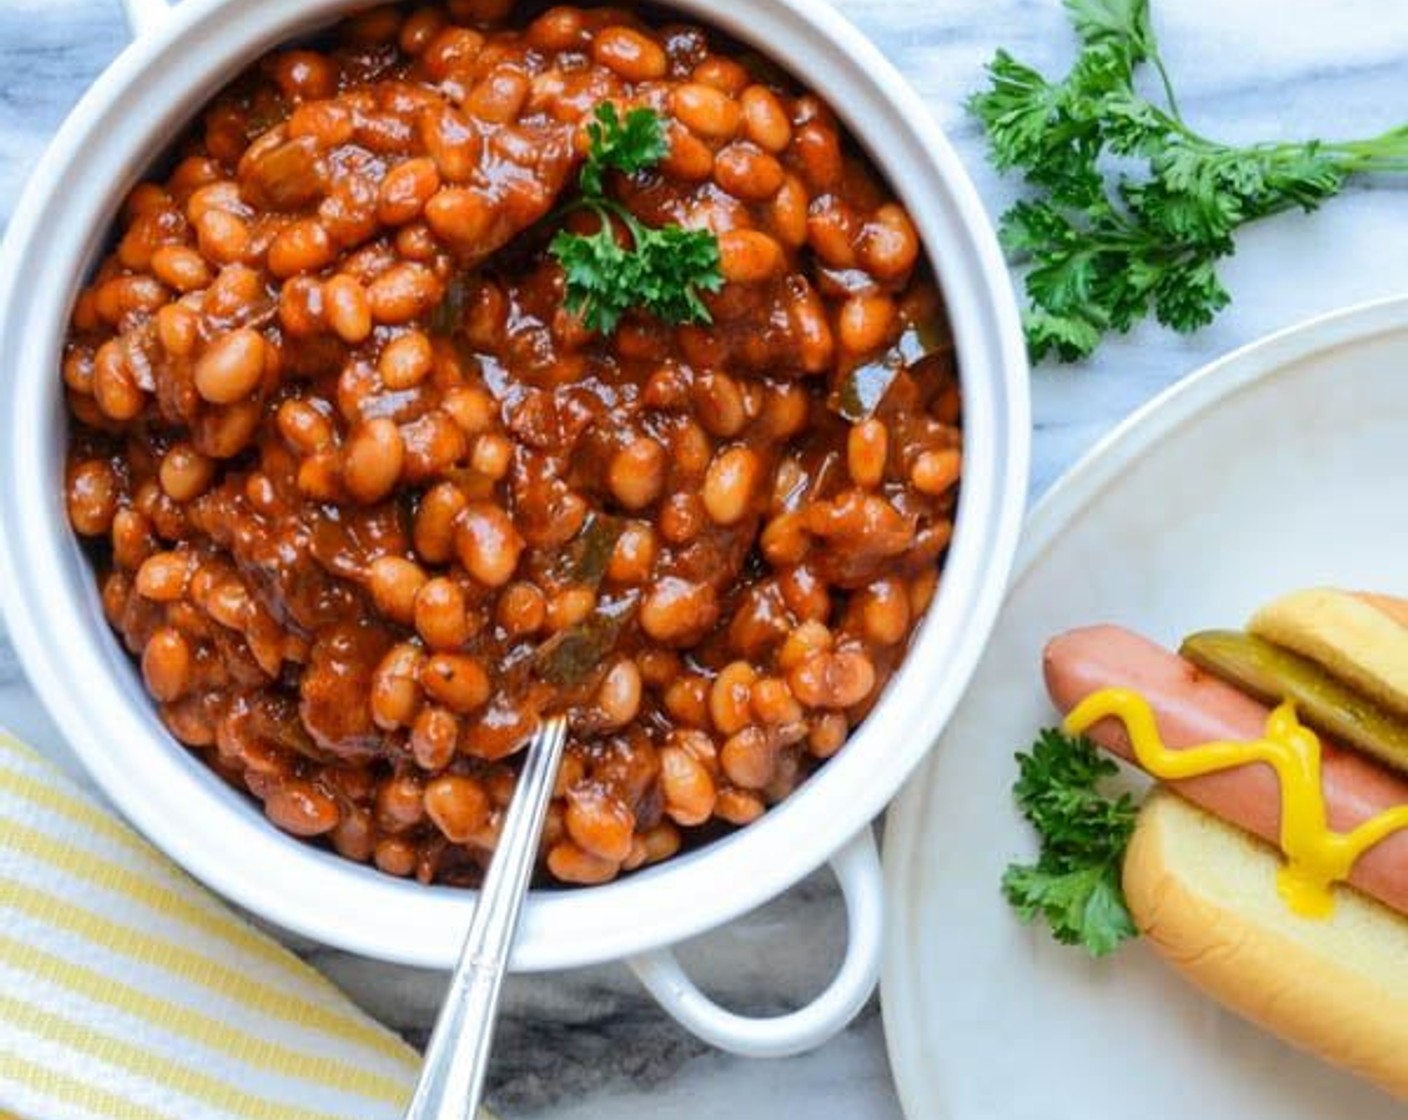 Barbecue Baked Beans